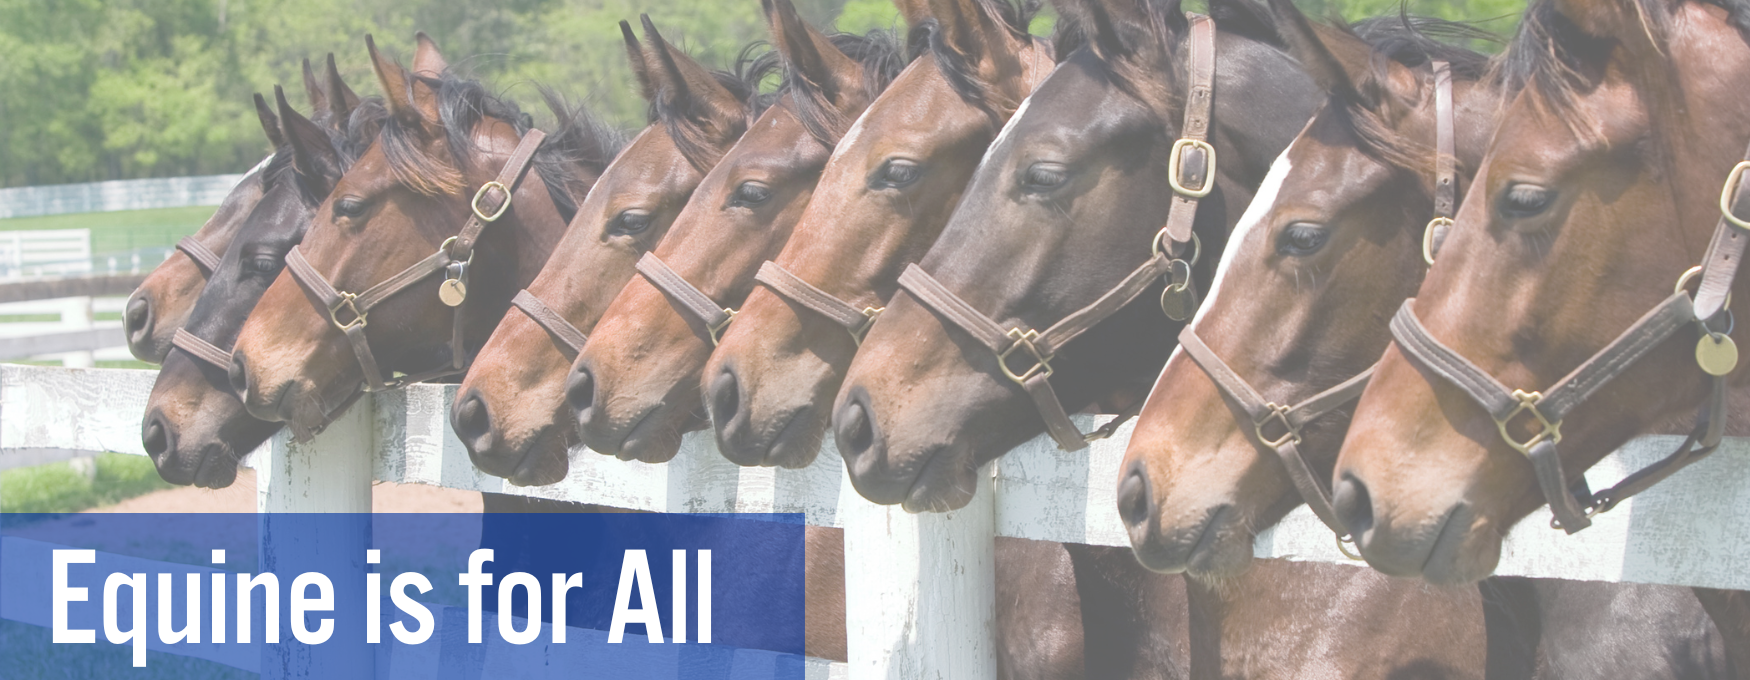 Equine is for All header; thoroughbreds at fence